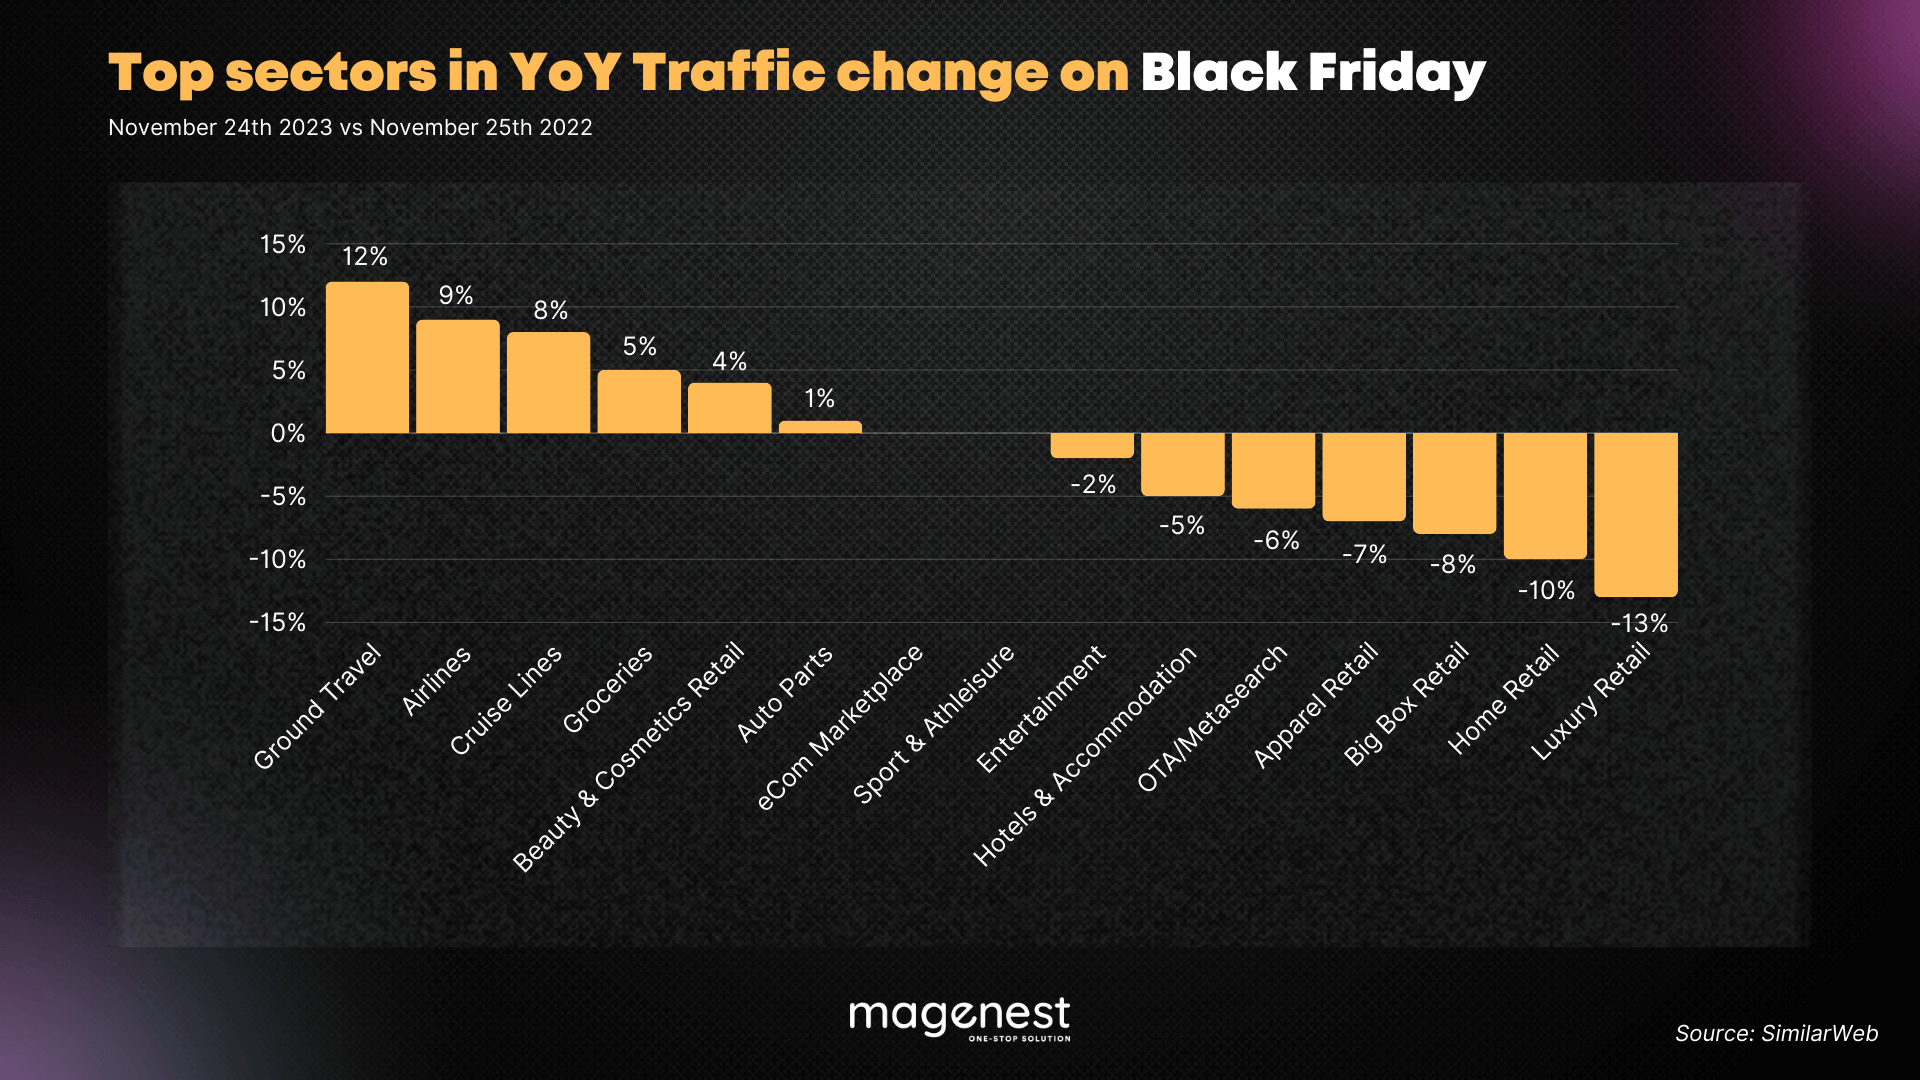 Top sectors in YoY traffic change on Black Friday